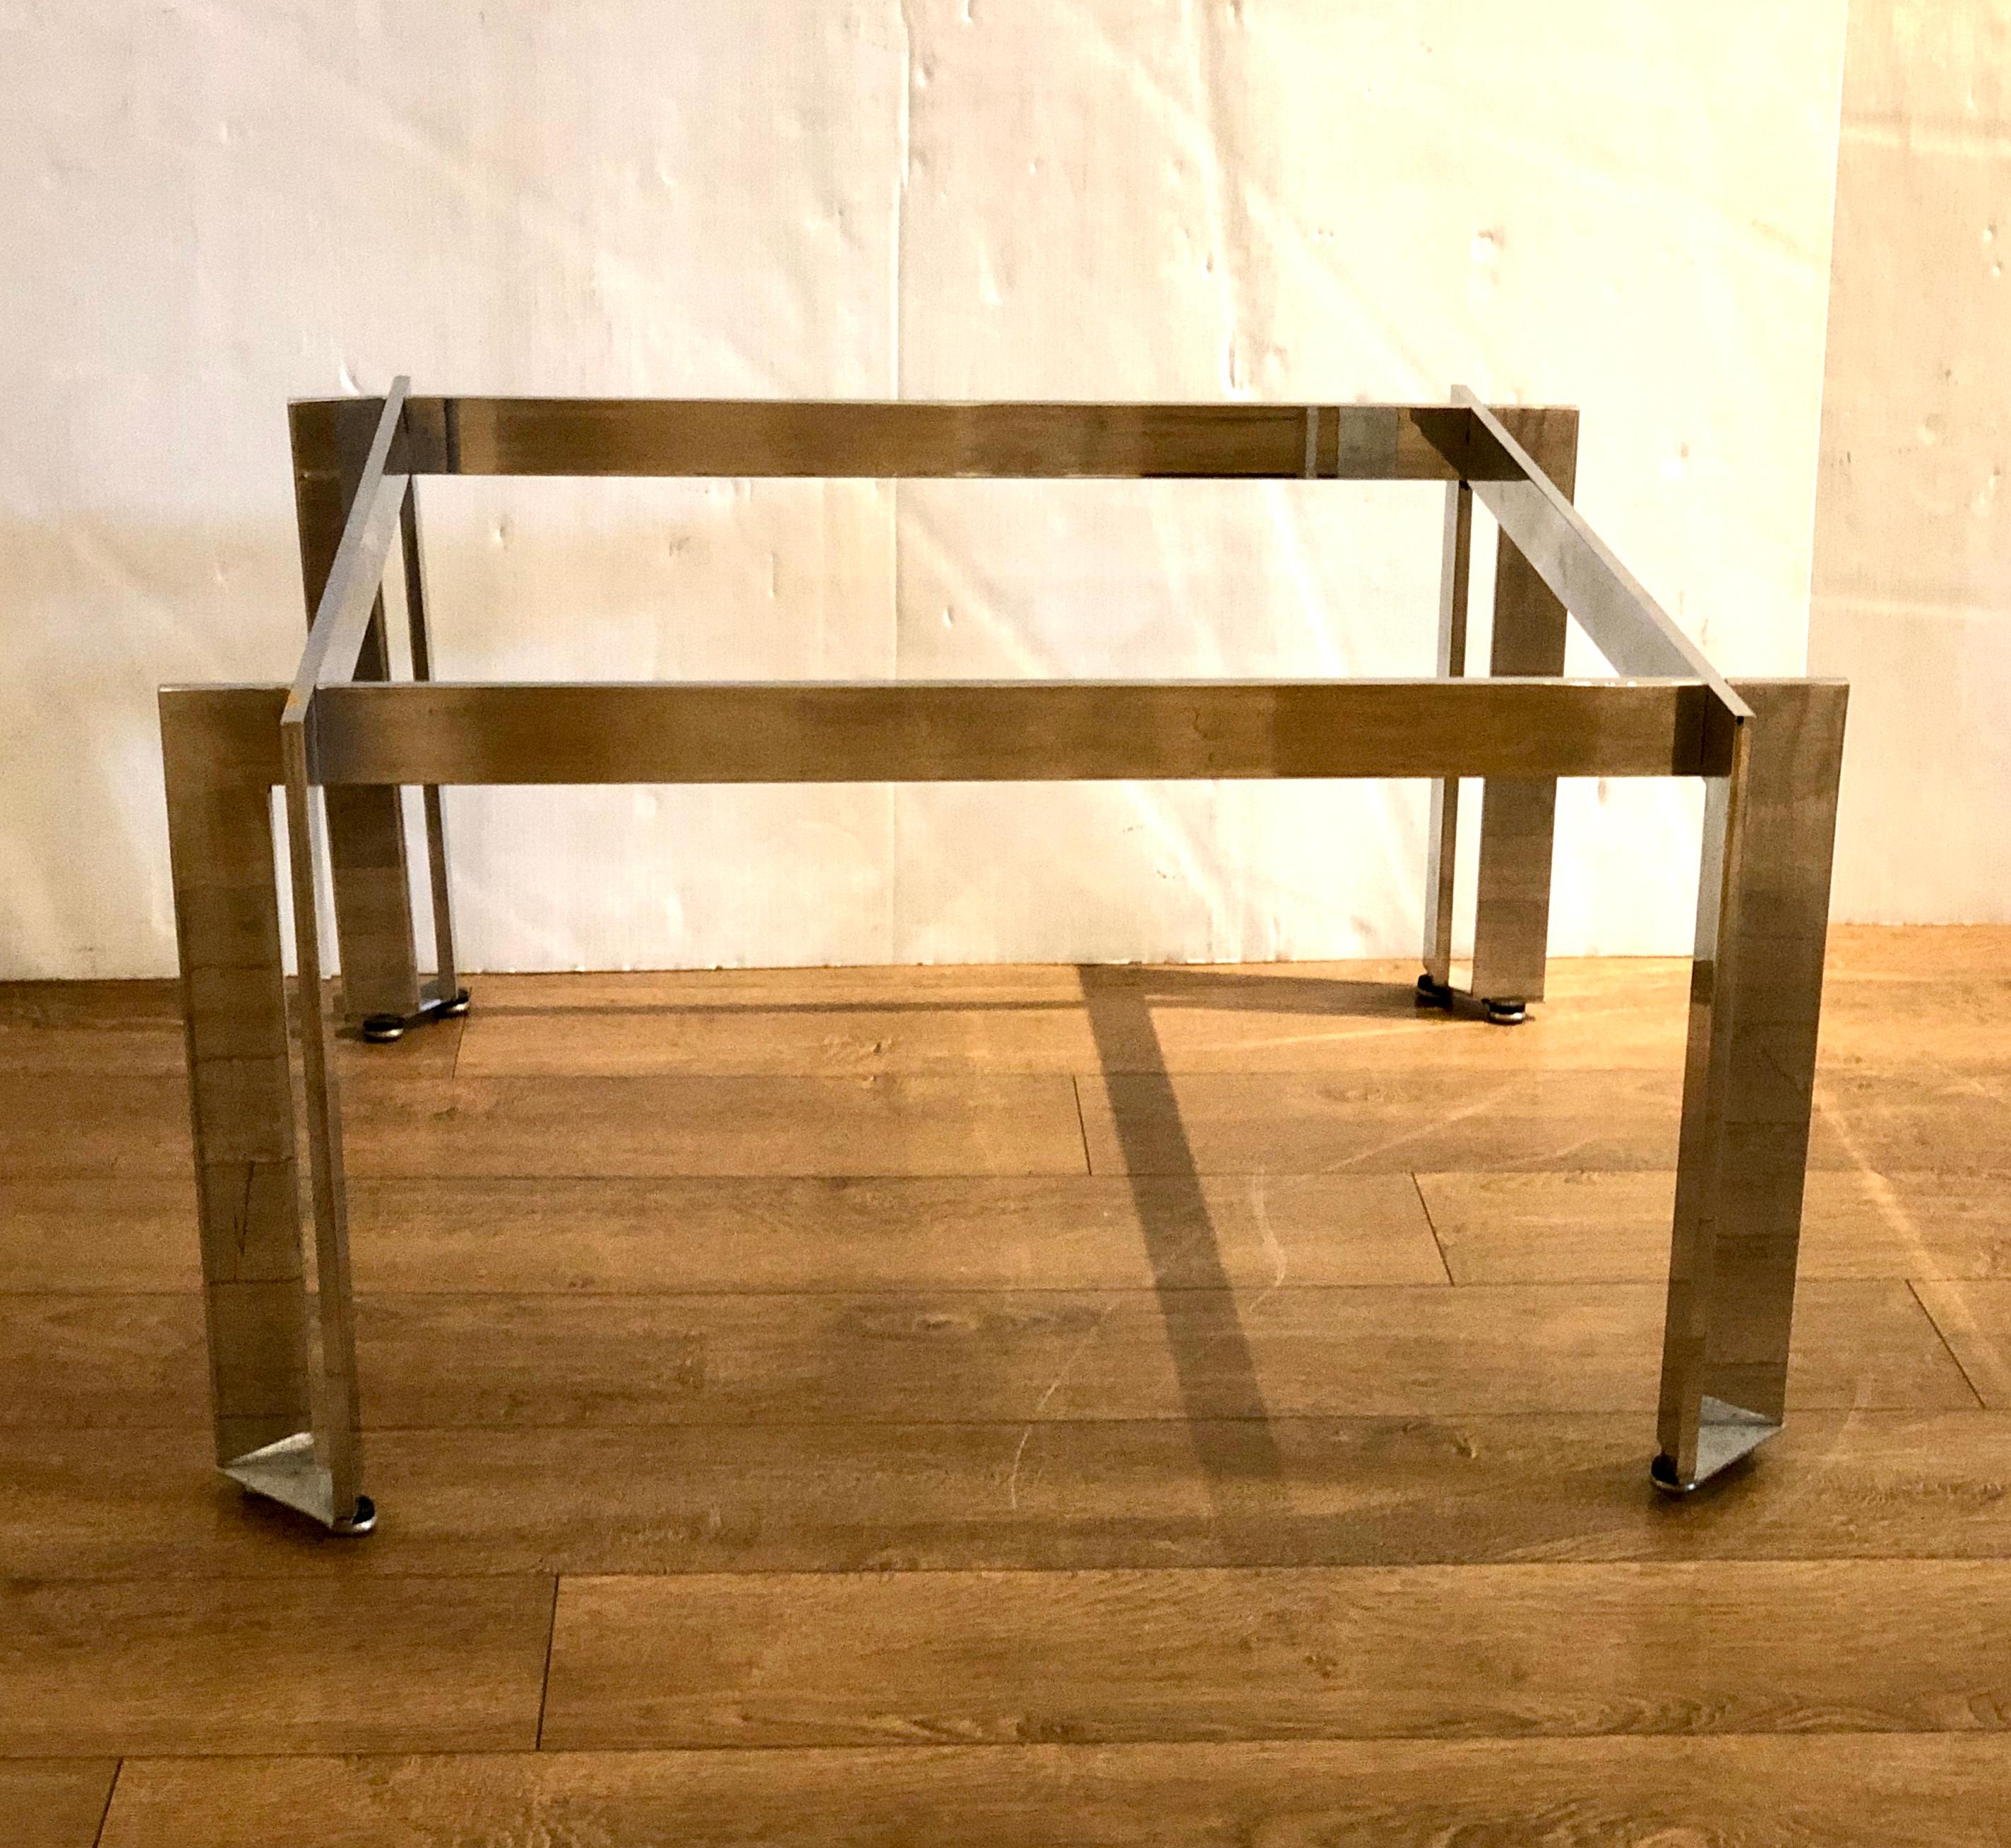 Incredible craftsmanship in this solid steel square coffee table with chrome polished finish, circa 1970s. We are selling the table without top it can have a glass or a marble top whatever your choice, its solid sturdy we polished the piece looks